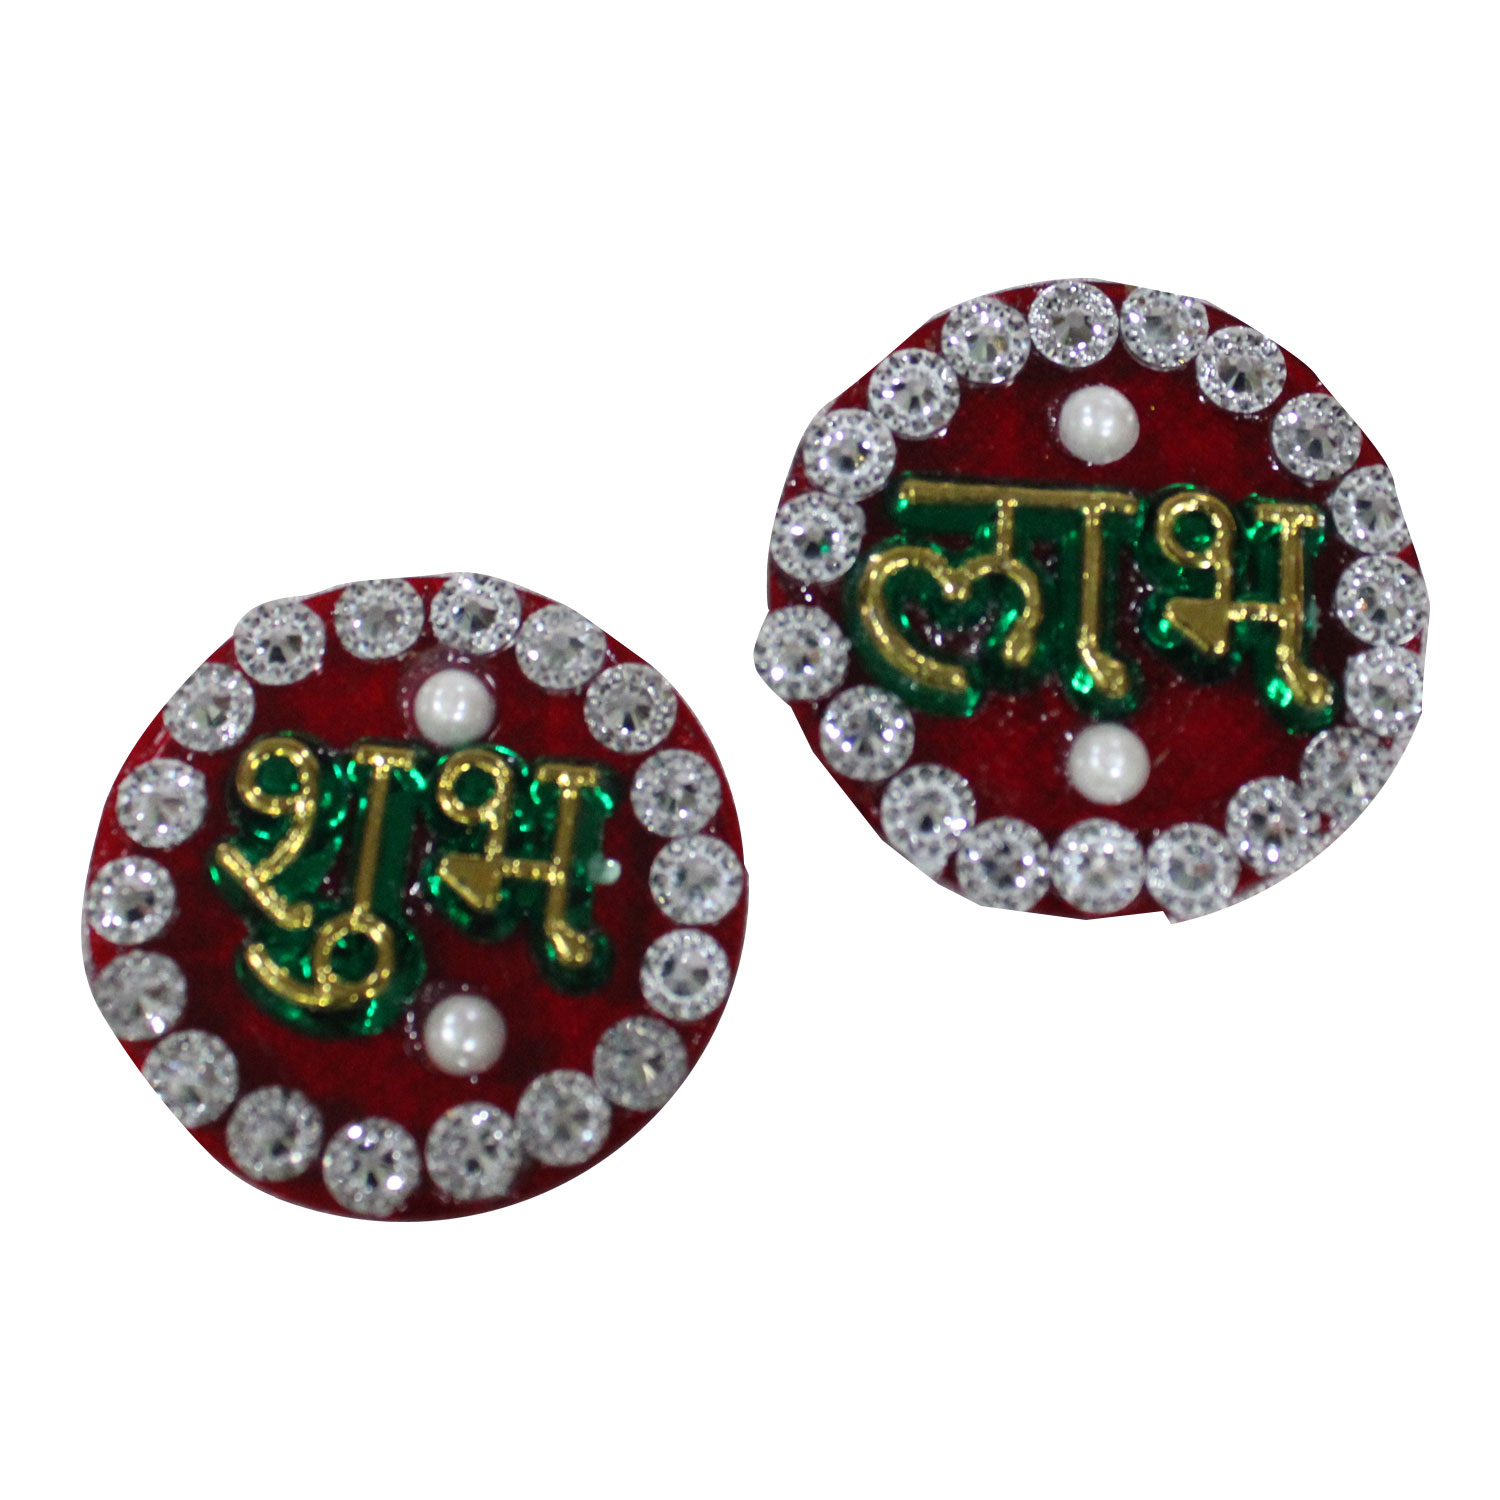 Acrelic Red Dimond Work Labh Shubh